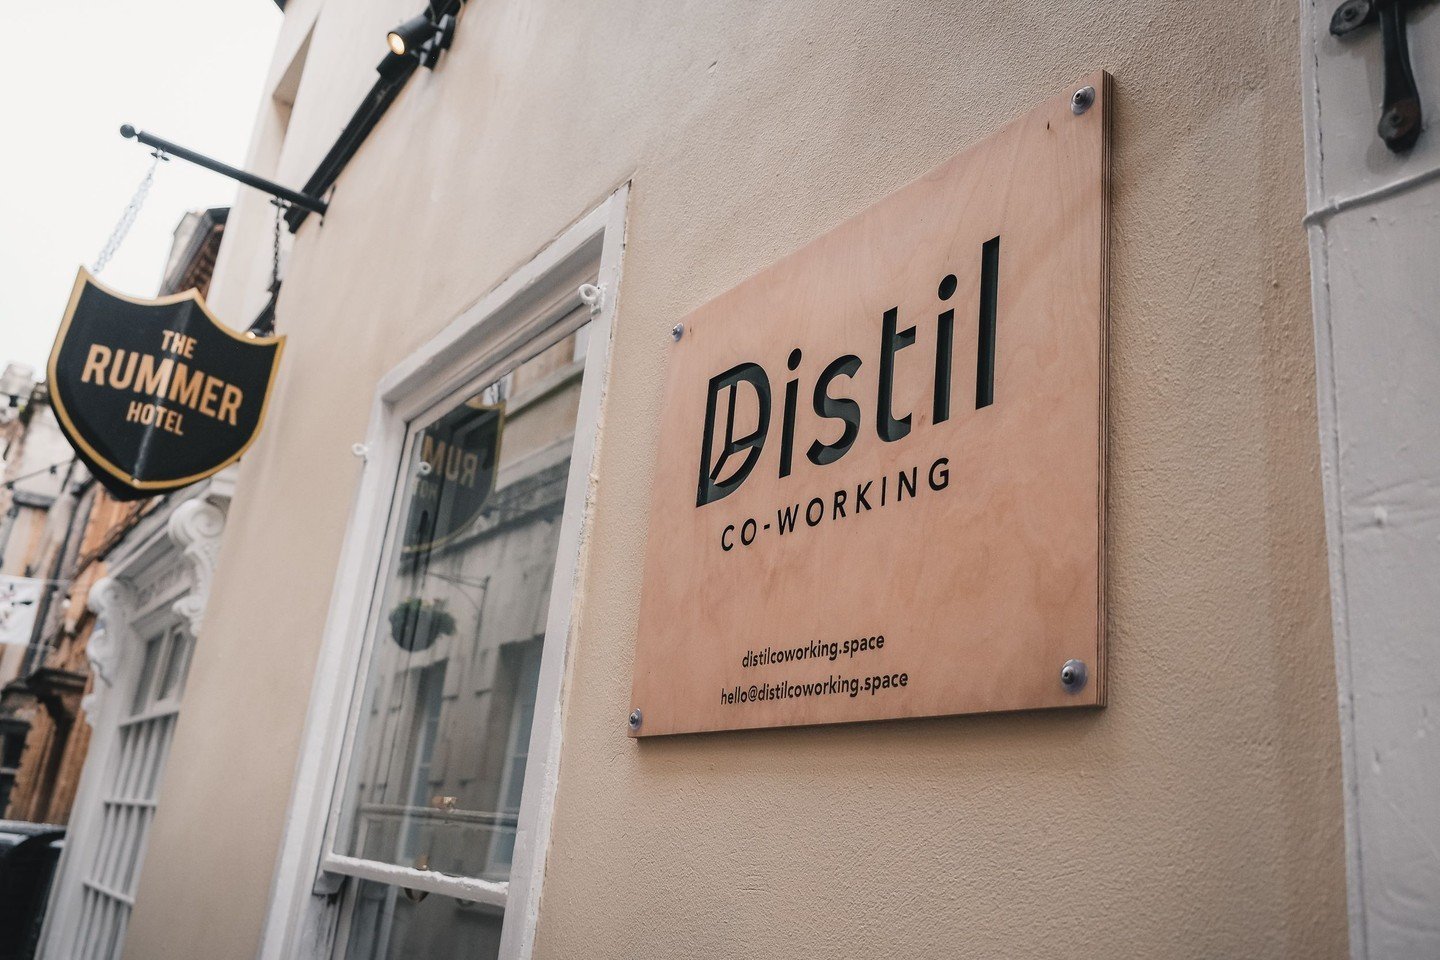 Requests for tours of Distil Co-working are really picking up! 

Click on the 'book a tour' button on our website and one of the Distil team will be in touch to arrange a time for you to experience our work and meeting spaces in St Nicholas Market, c